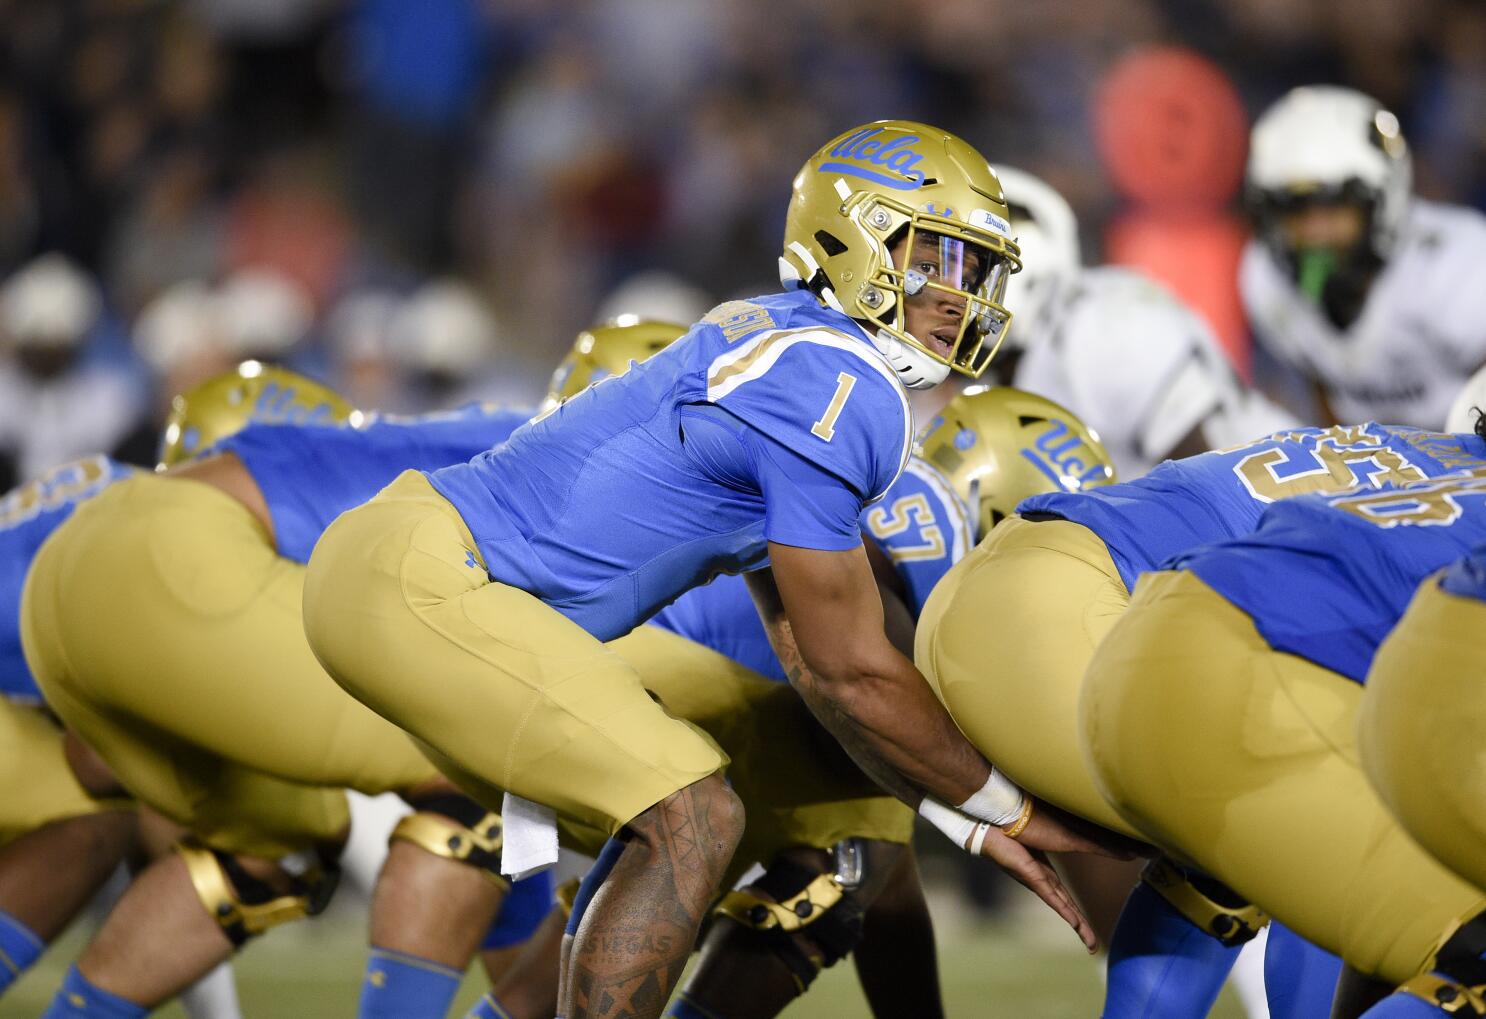 UCLA players to wear jerseys with social justice messages - Los